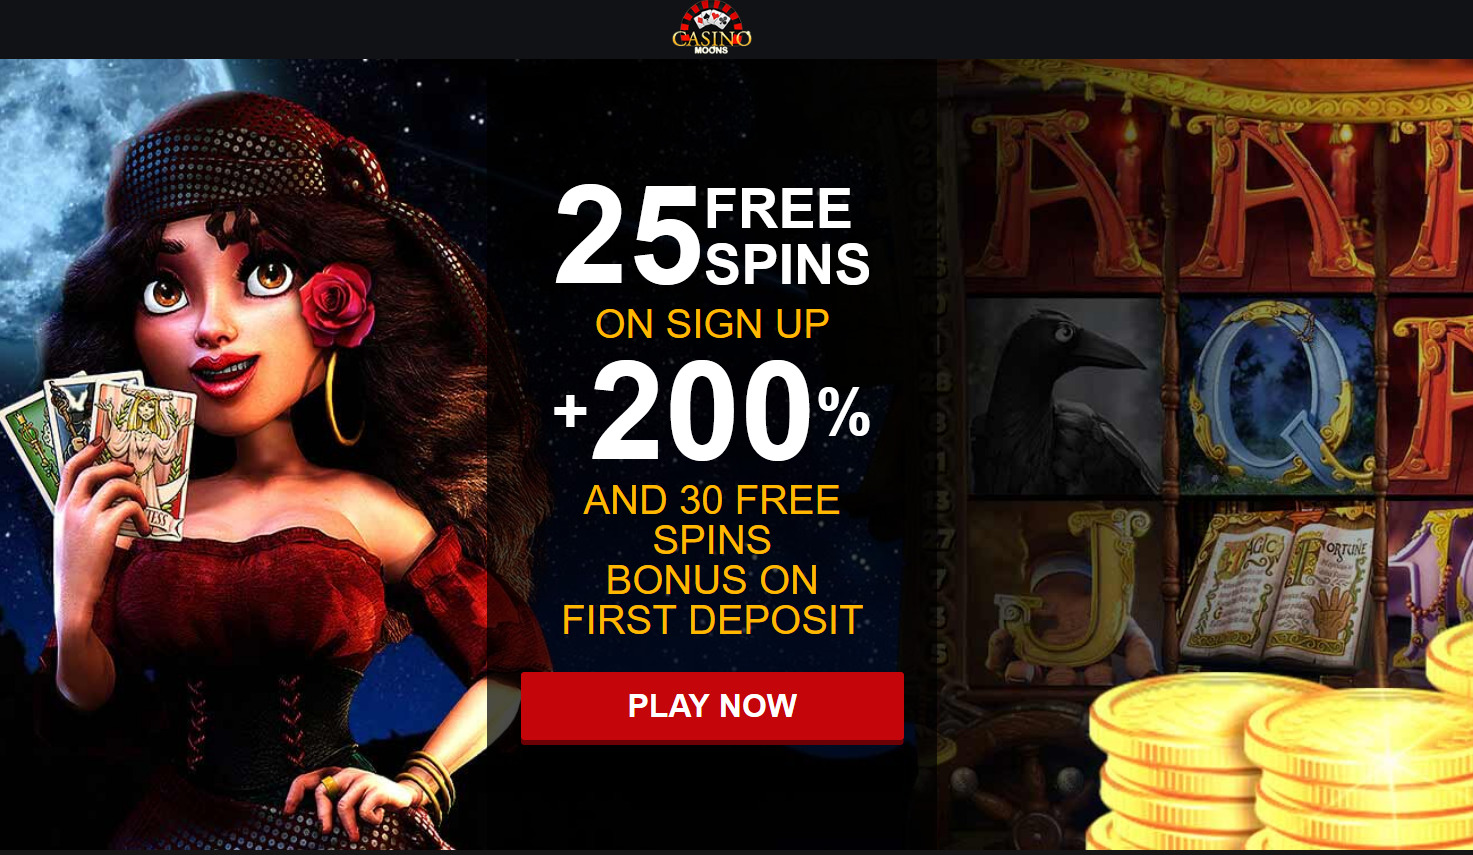 25 FREE SPINS ON SIGN UP + 200 % AND 30 FREE SPINS BONUS ON FIRST DEPOSIT